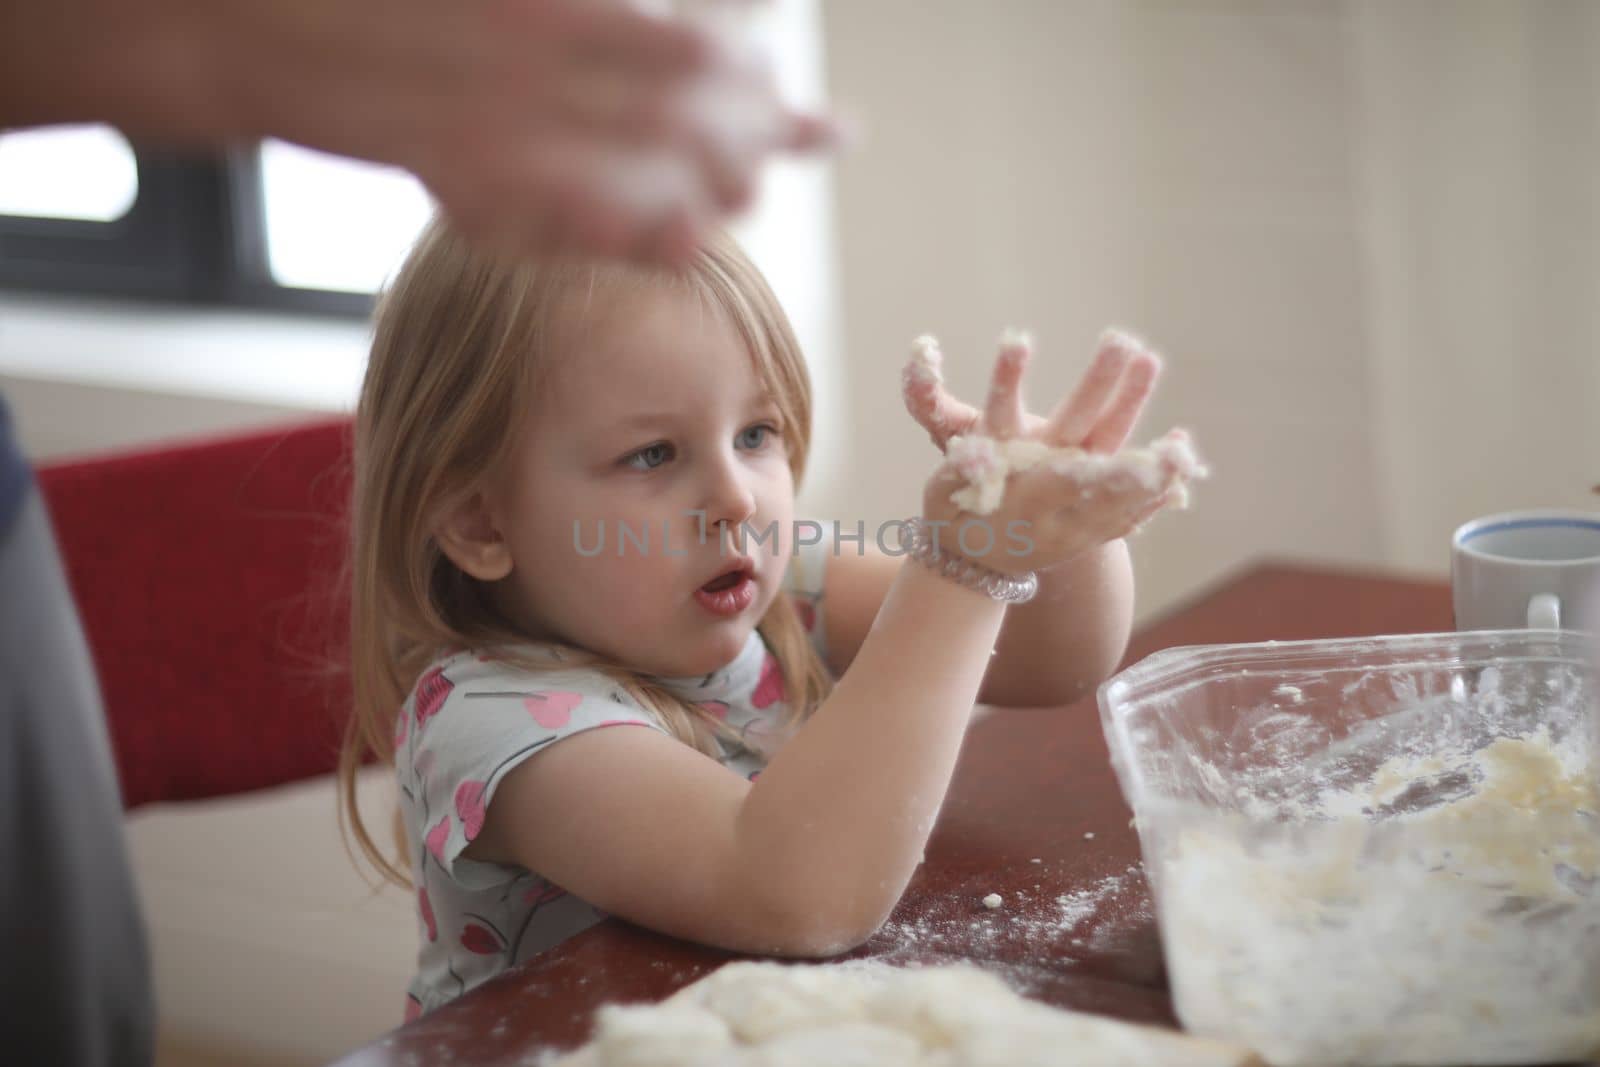 little girl helps to cook by kneading the dough, a child helps to cook at home. Homemade food and little helper. by paralisart